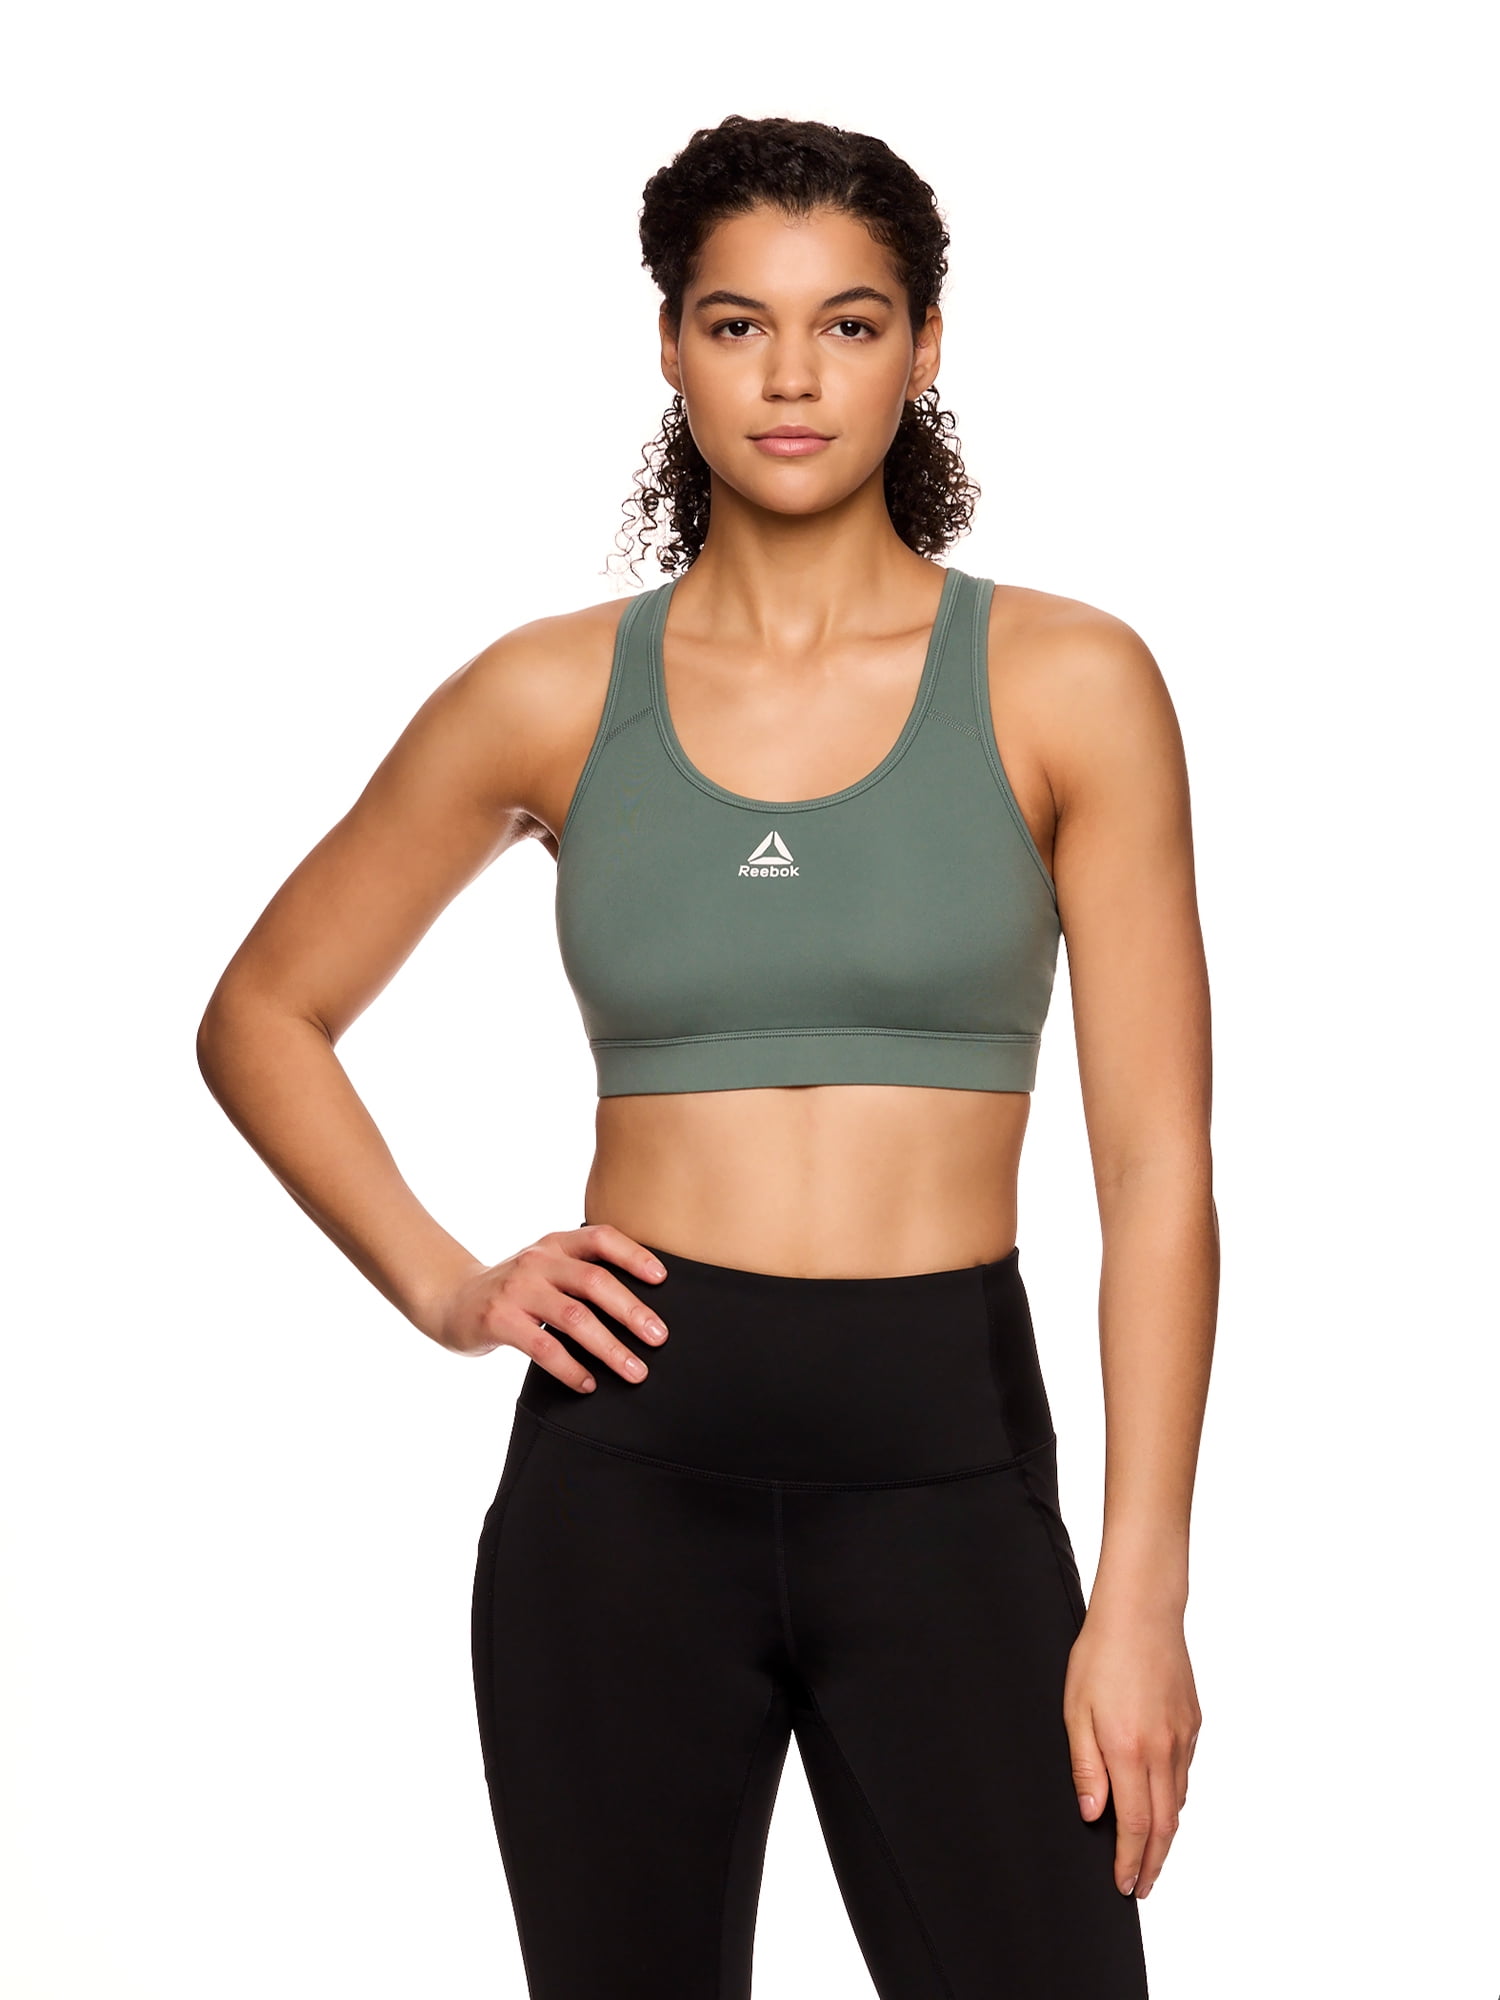 Reebok Women's Stronger Sports Bra with Mesh Panel and